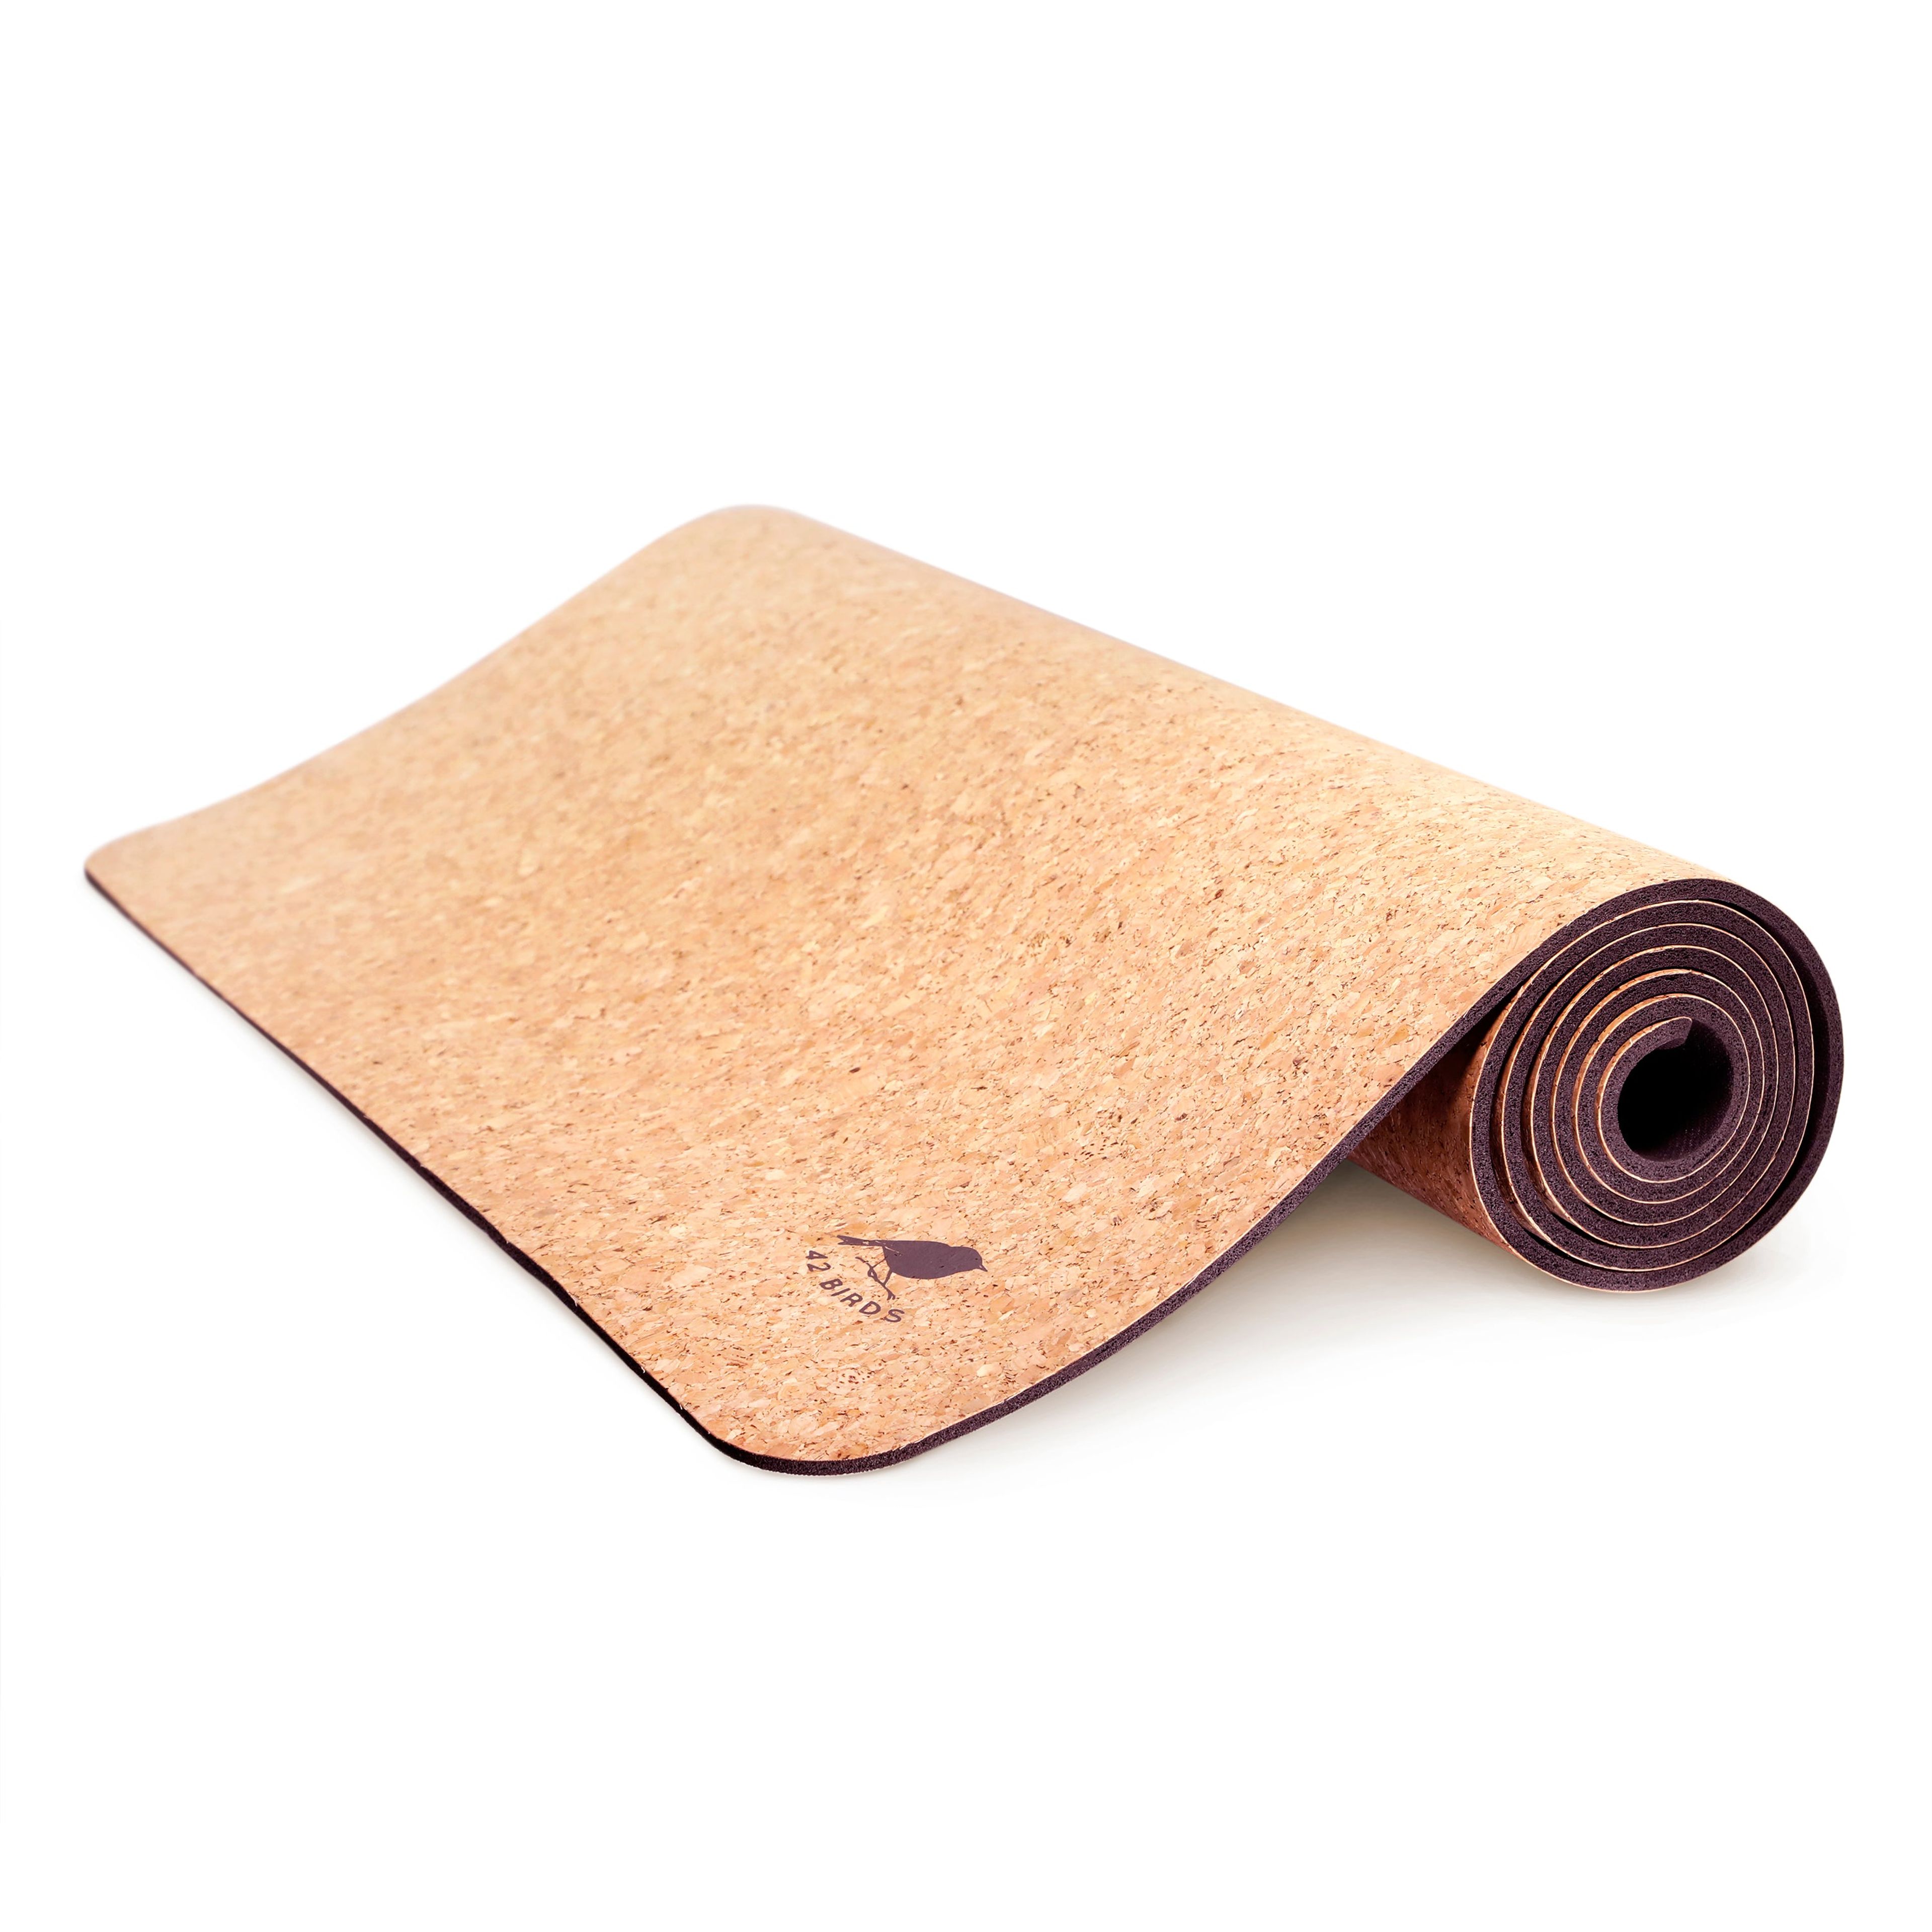 Cork Yoga Industrial Mat “The Imperial Eagle”